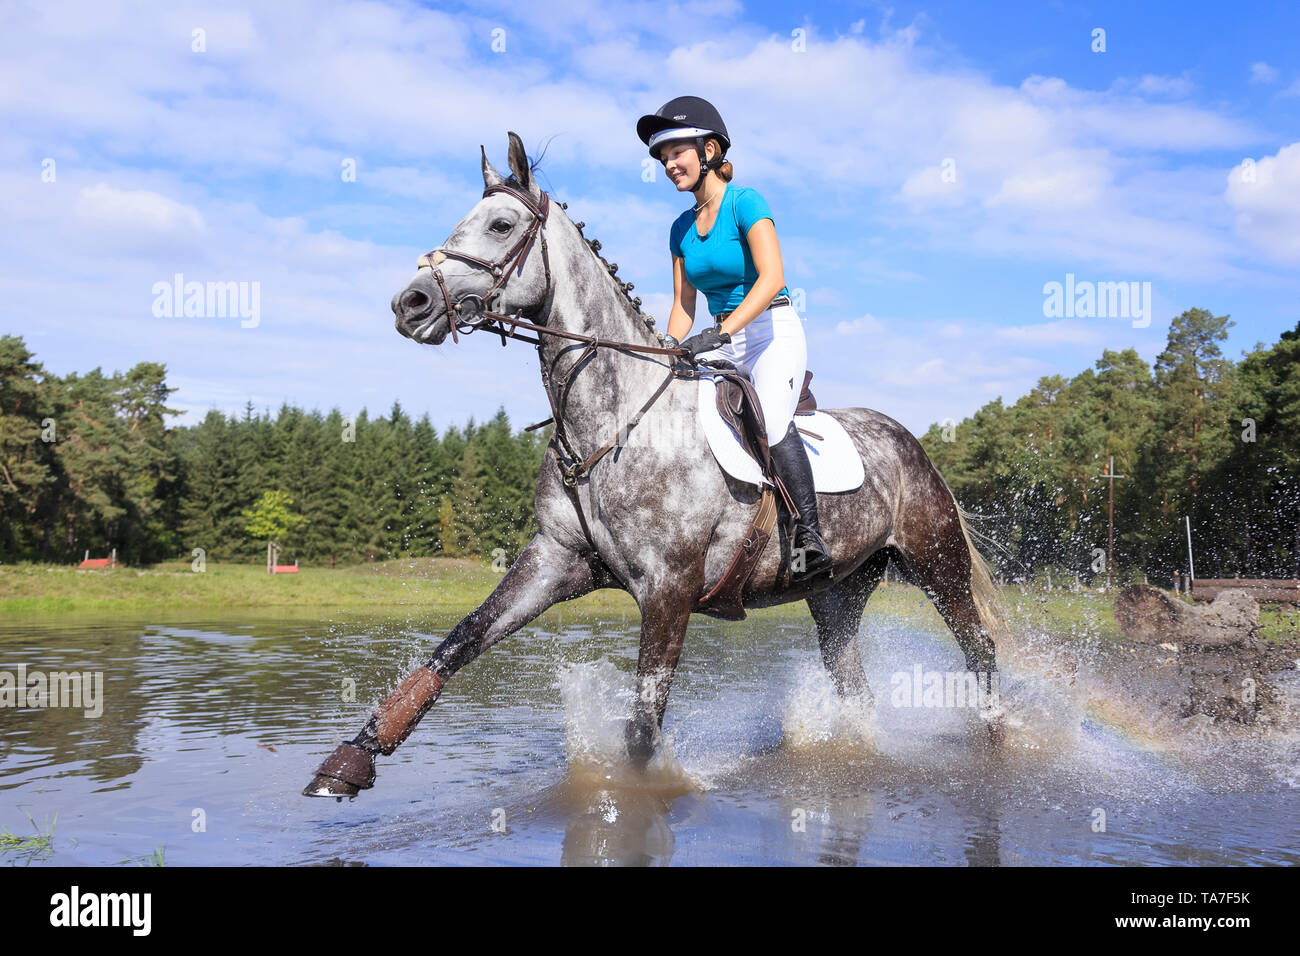 Trakehner. Rider on juvenile grey horse during a cross-country ride, galloping through water. Germany Stock Photo